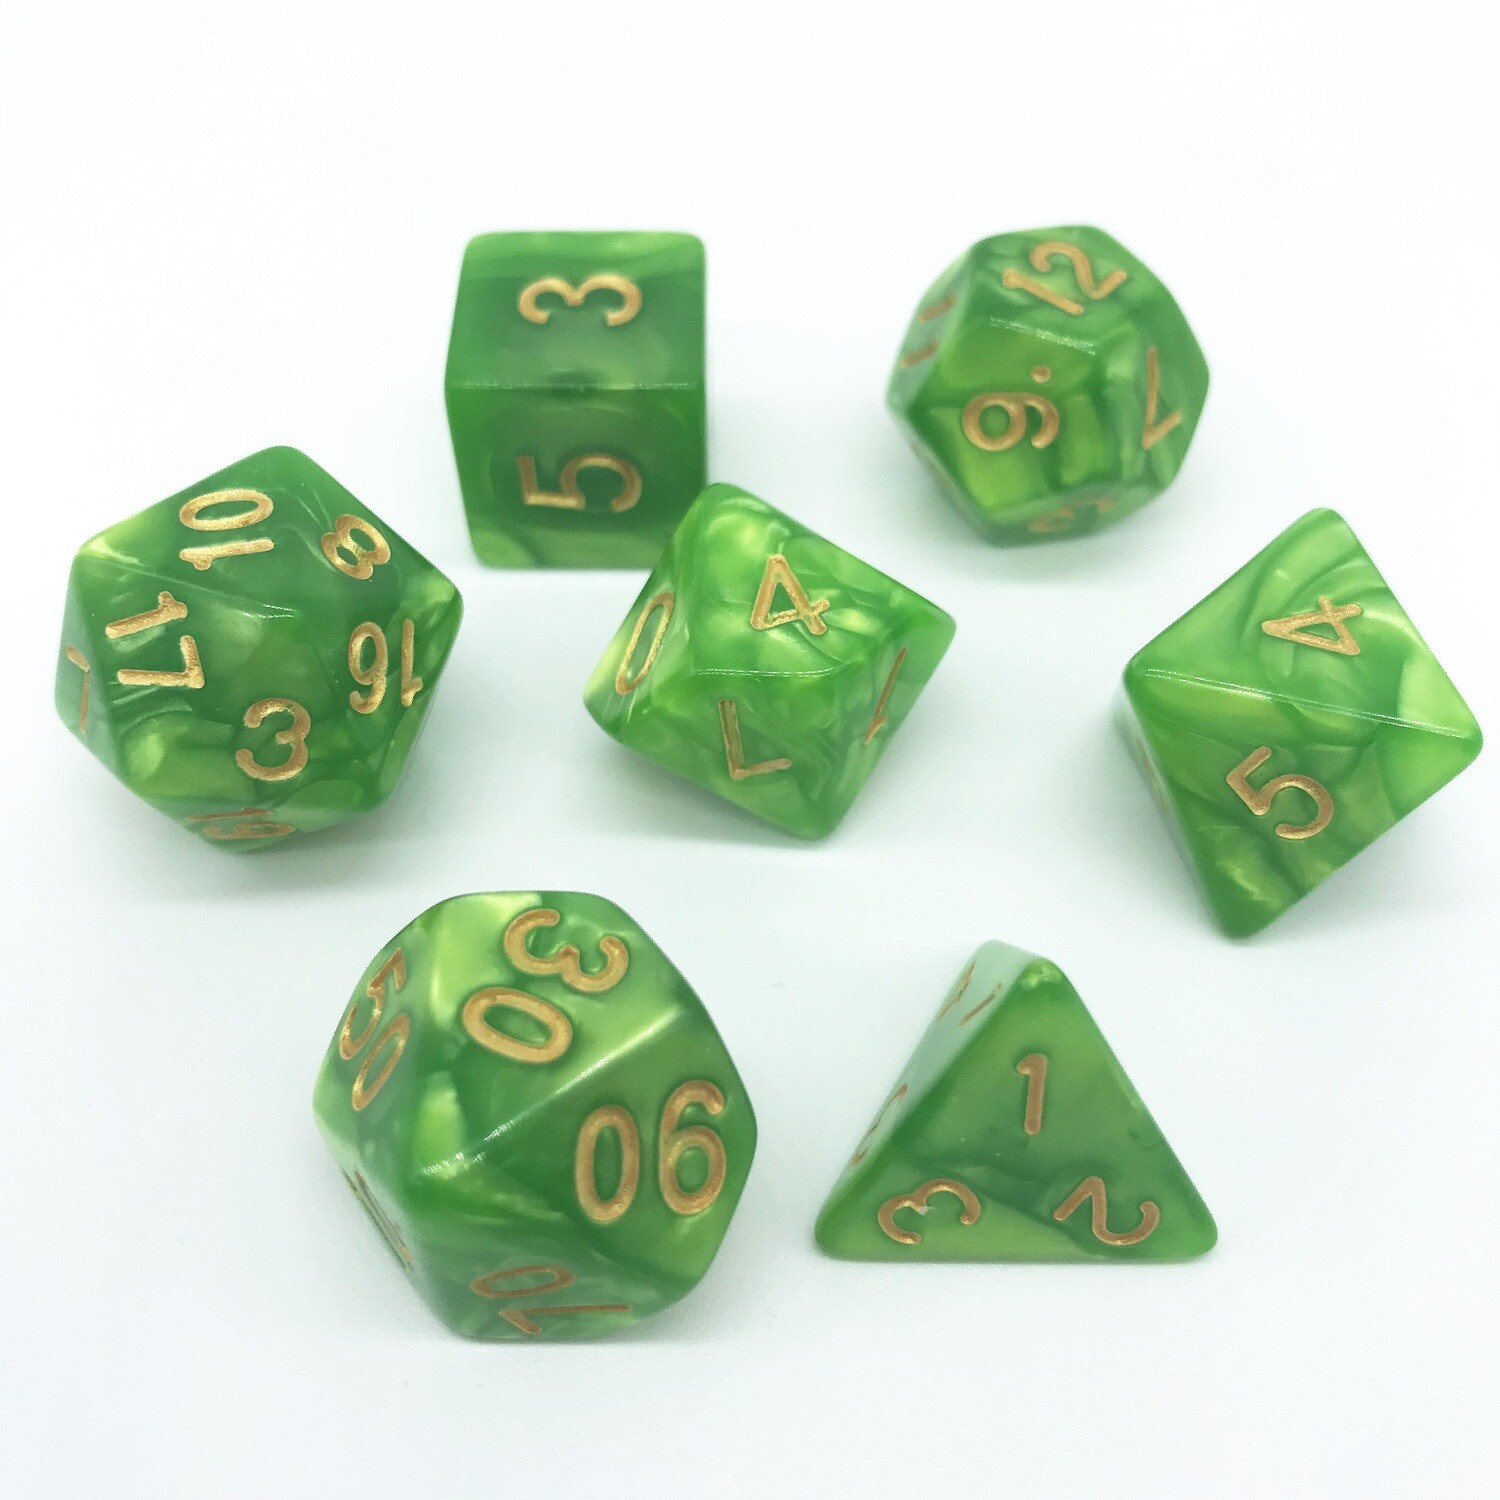 Dice Set - Green marbled with gold numbers